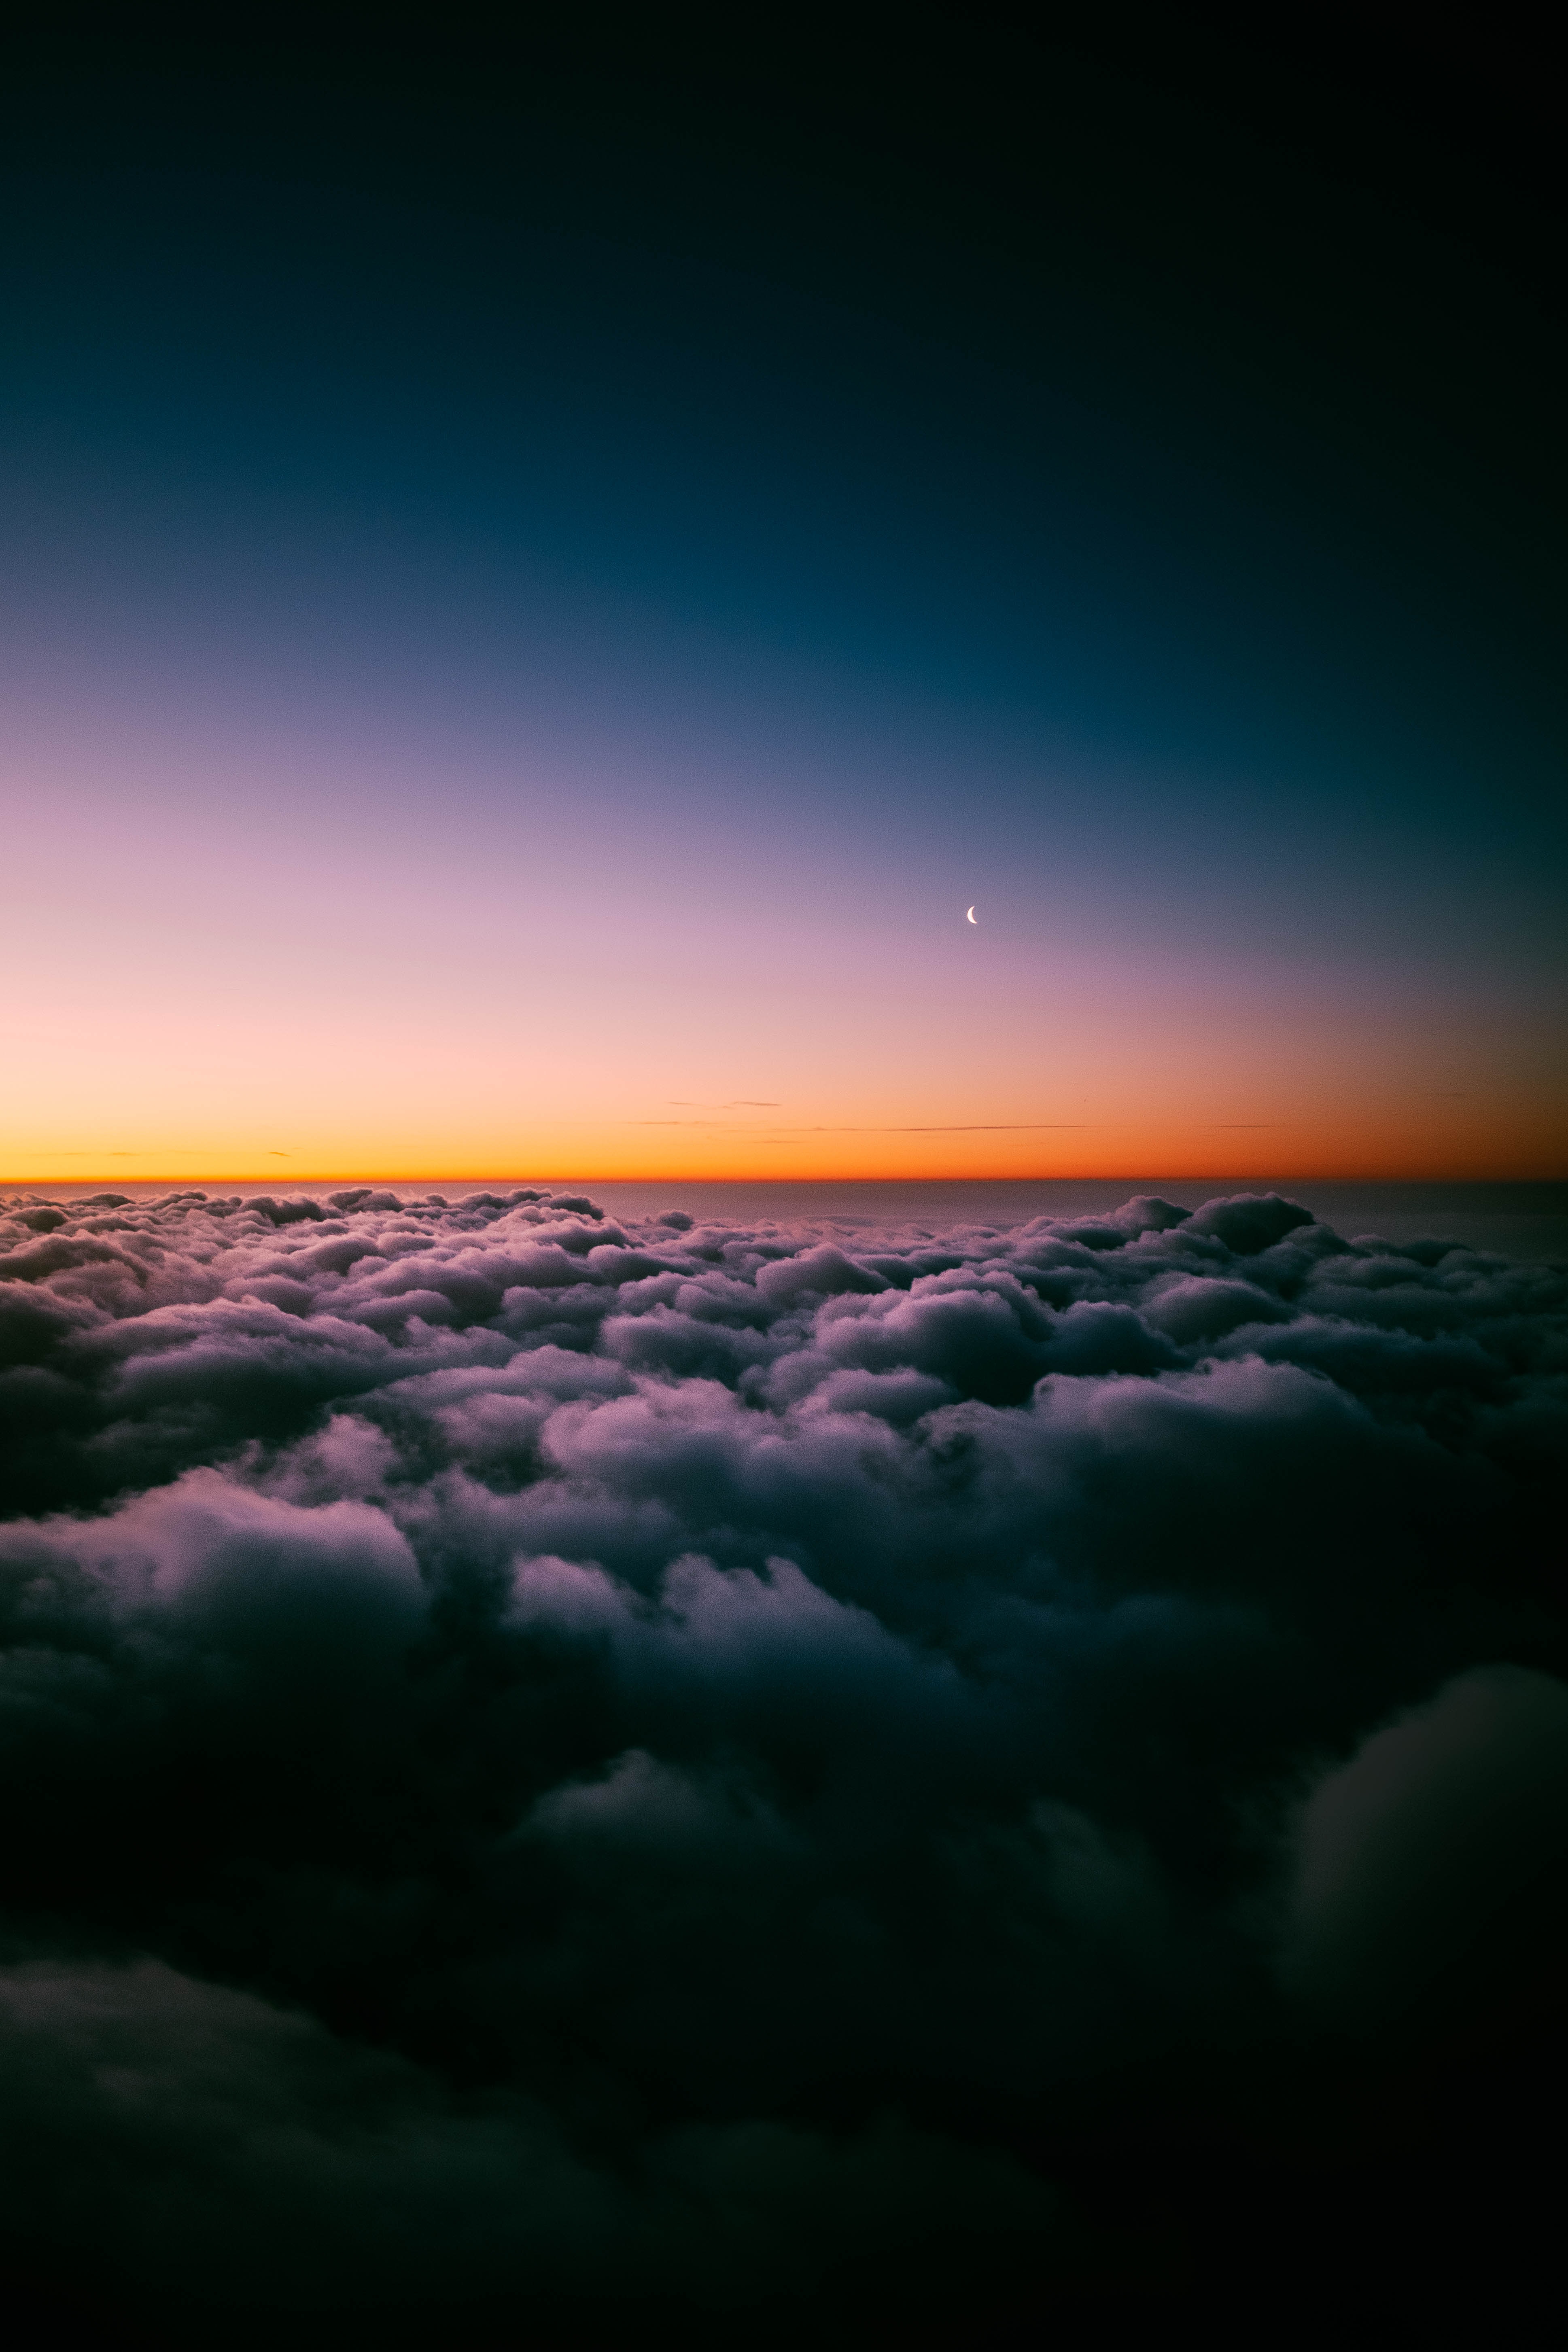 clouds, above the clouds, porous, moon, nature, sunset, twilight, dusk, sky horizon High Definition image